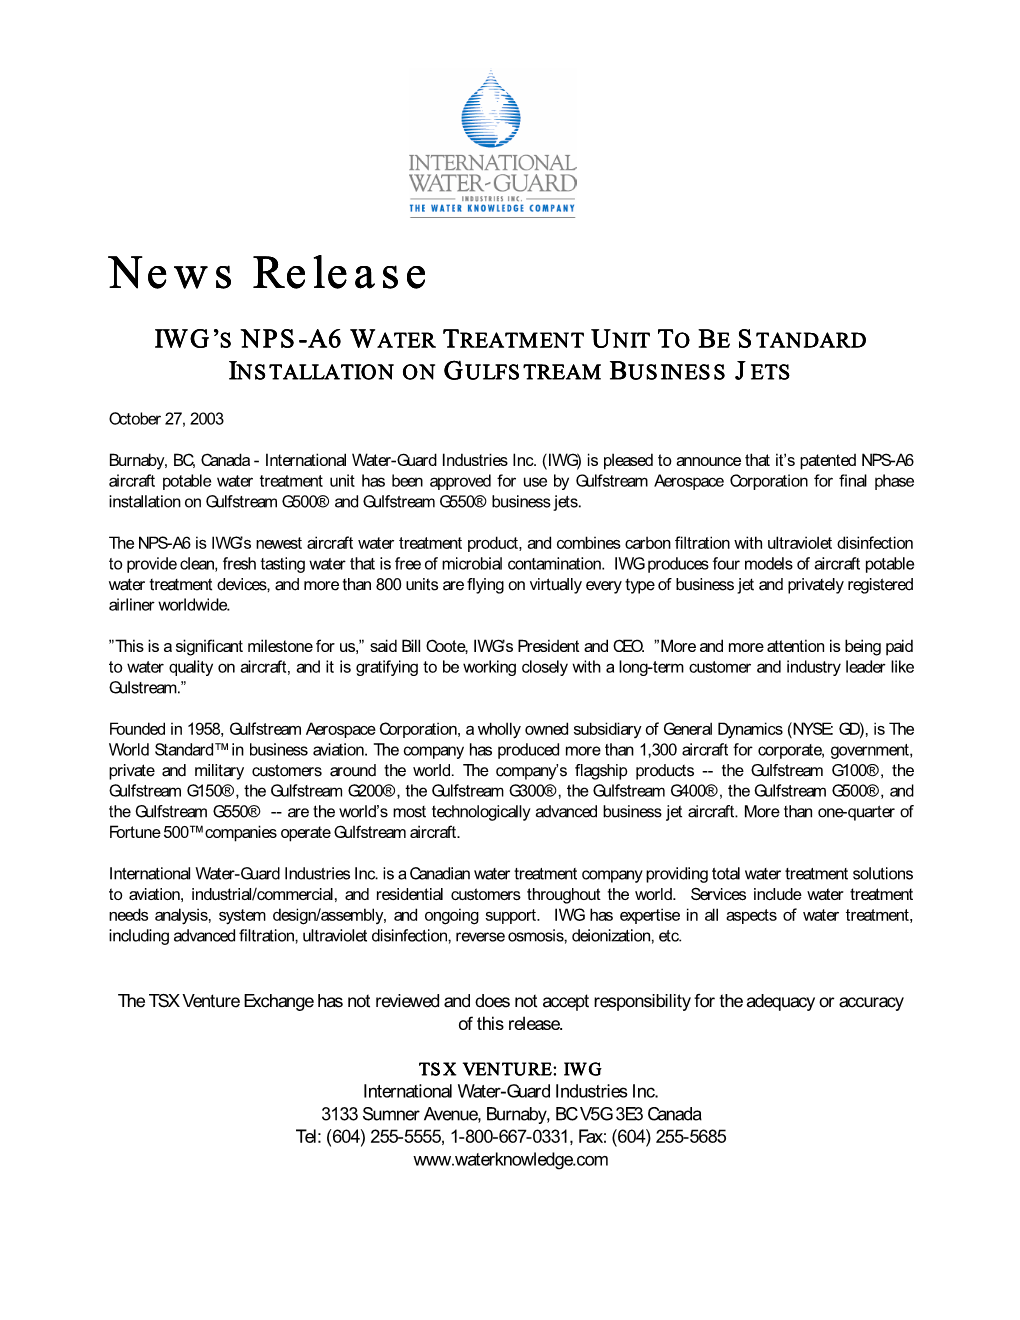 IWG's NPS-A6 Water Treatment Unit to Be Standard Installation On